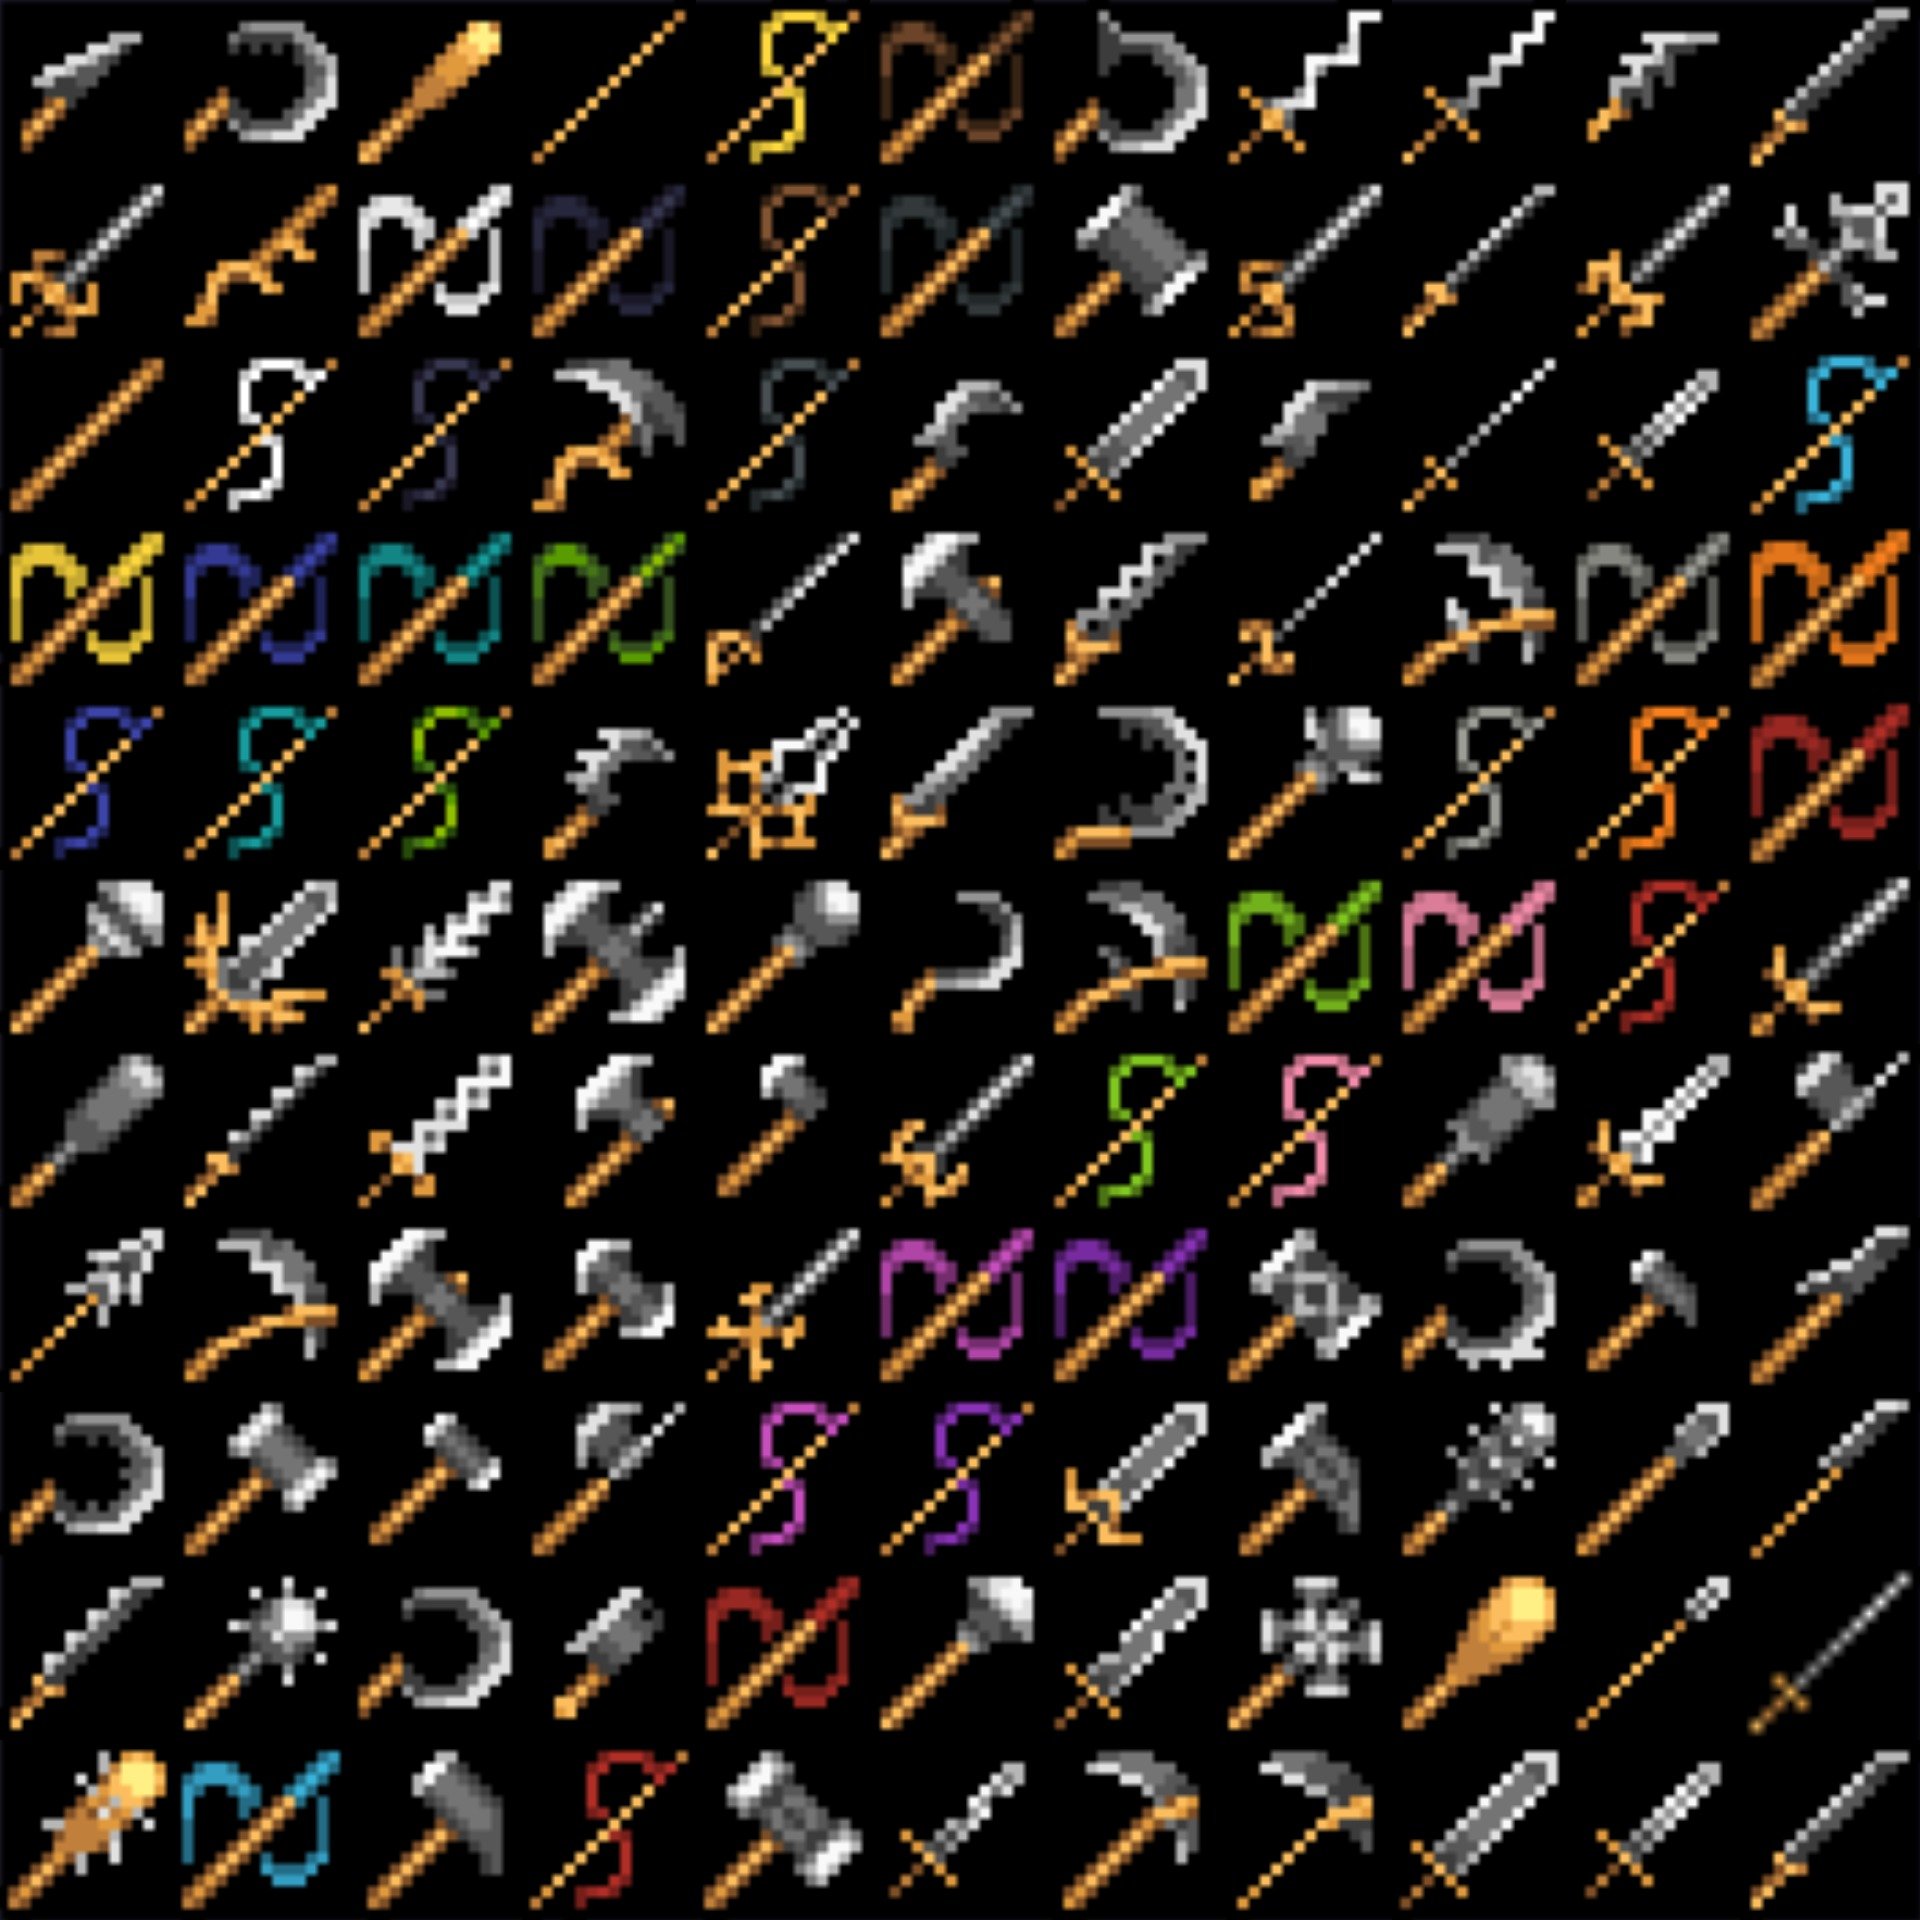 All the weapons so far